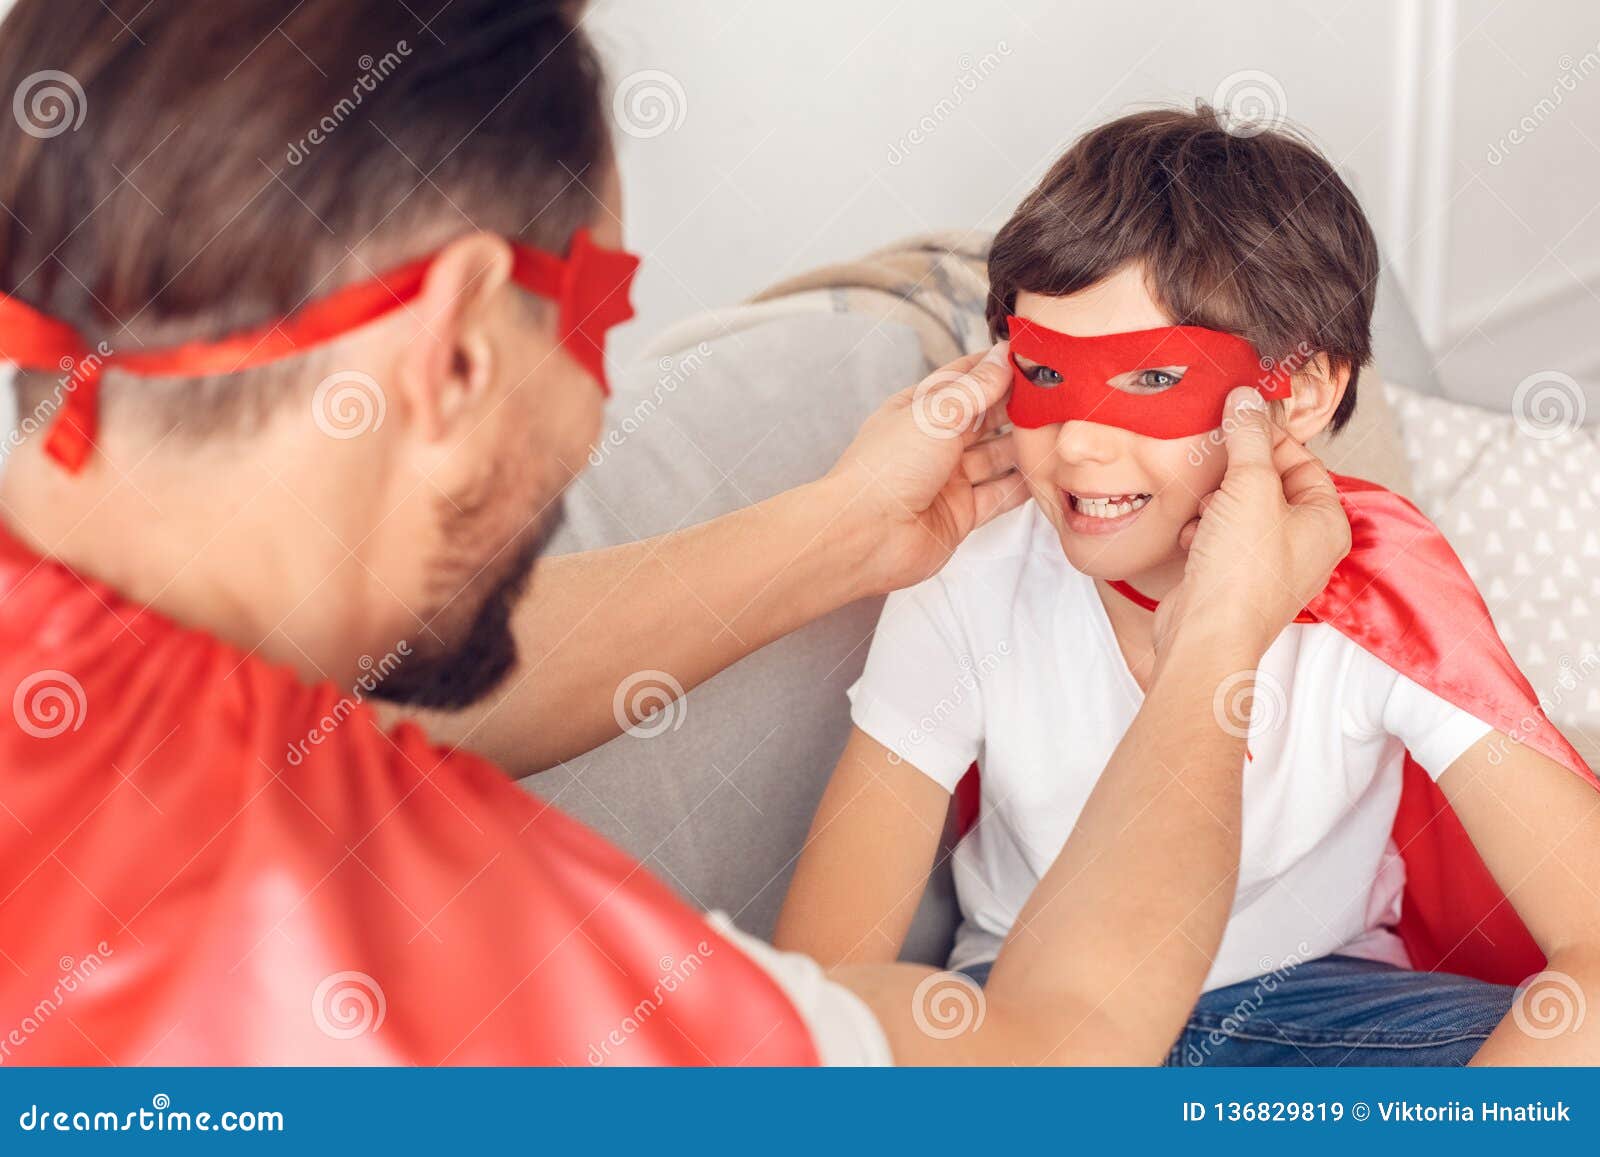 father and son in superheroe costumes at home sitting on sofa man putting mask on boy smiling close-up